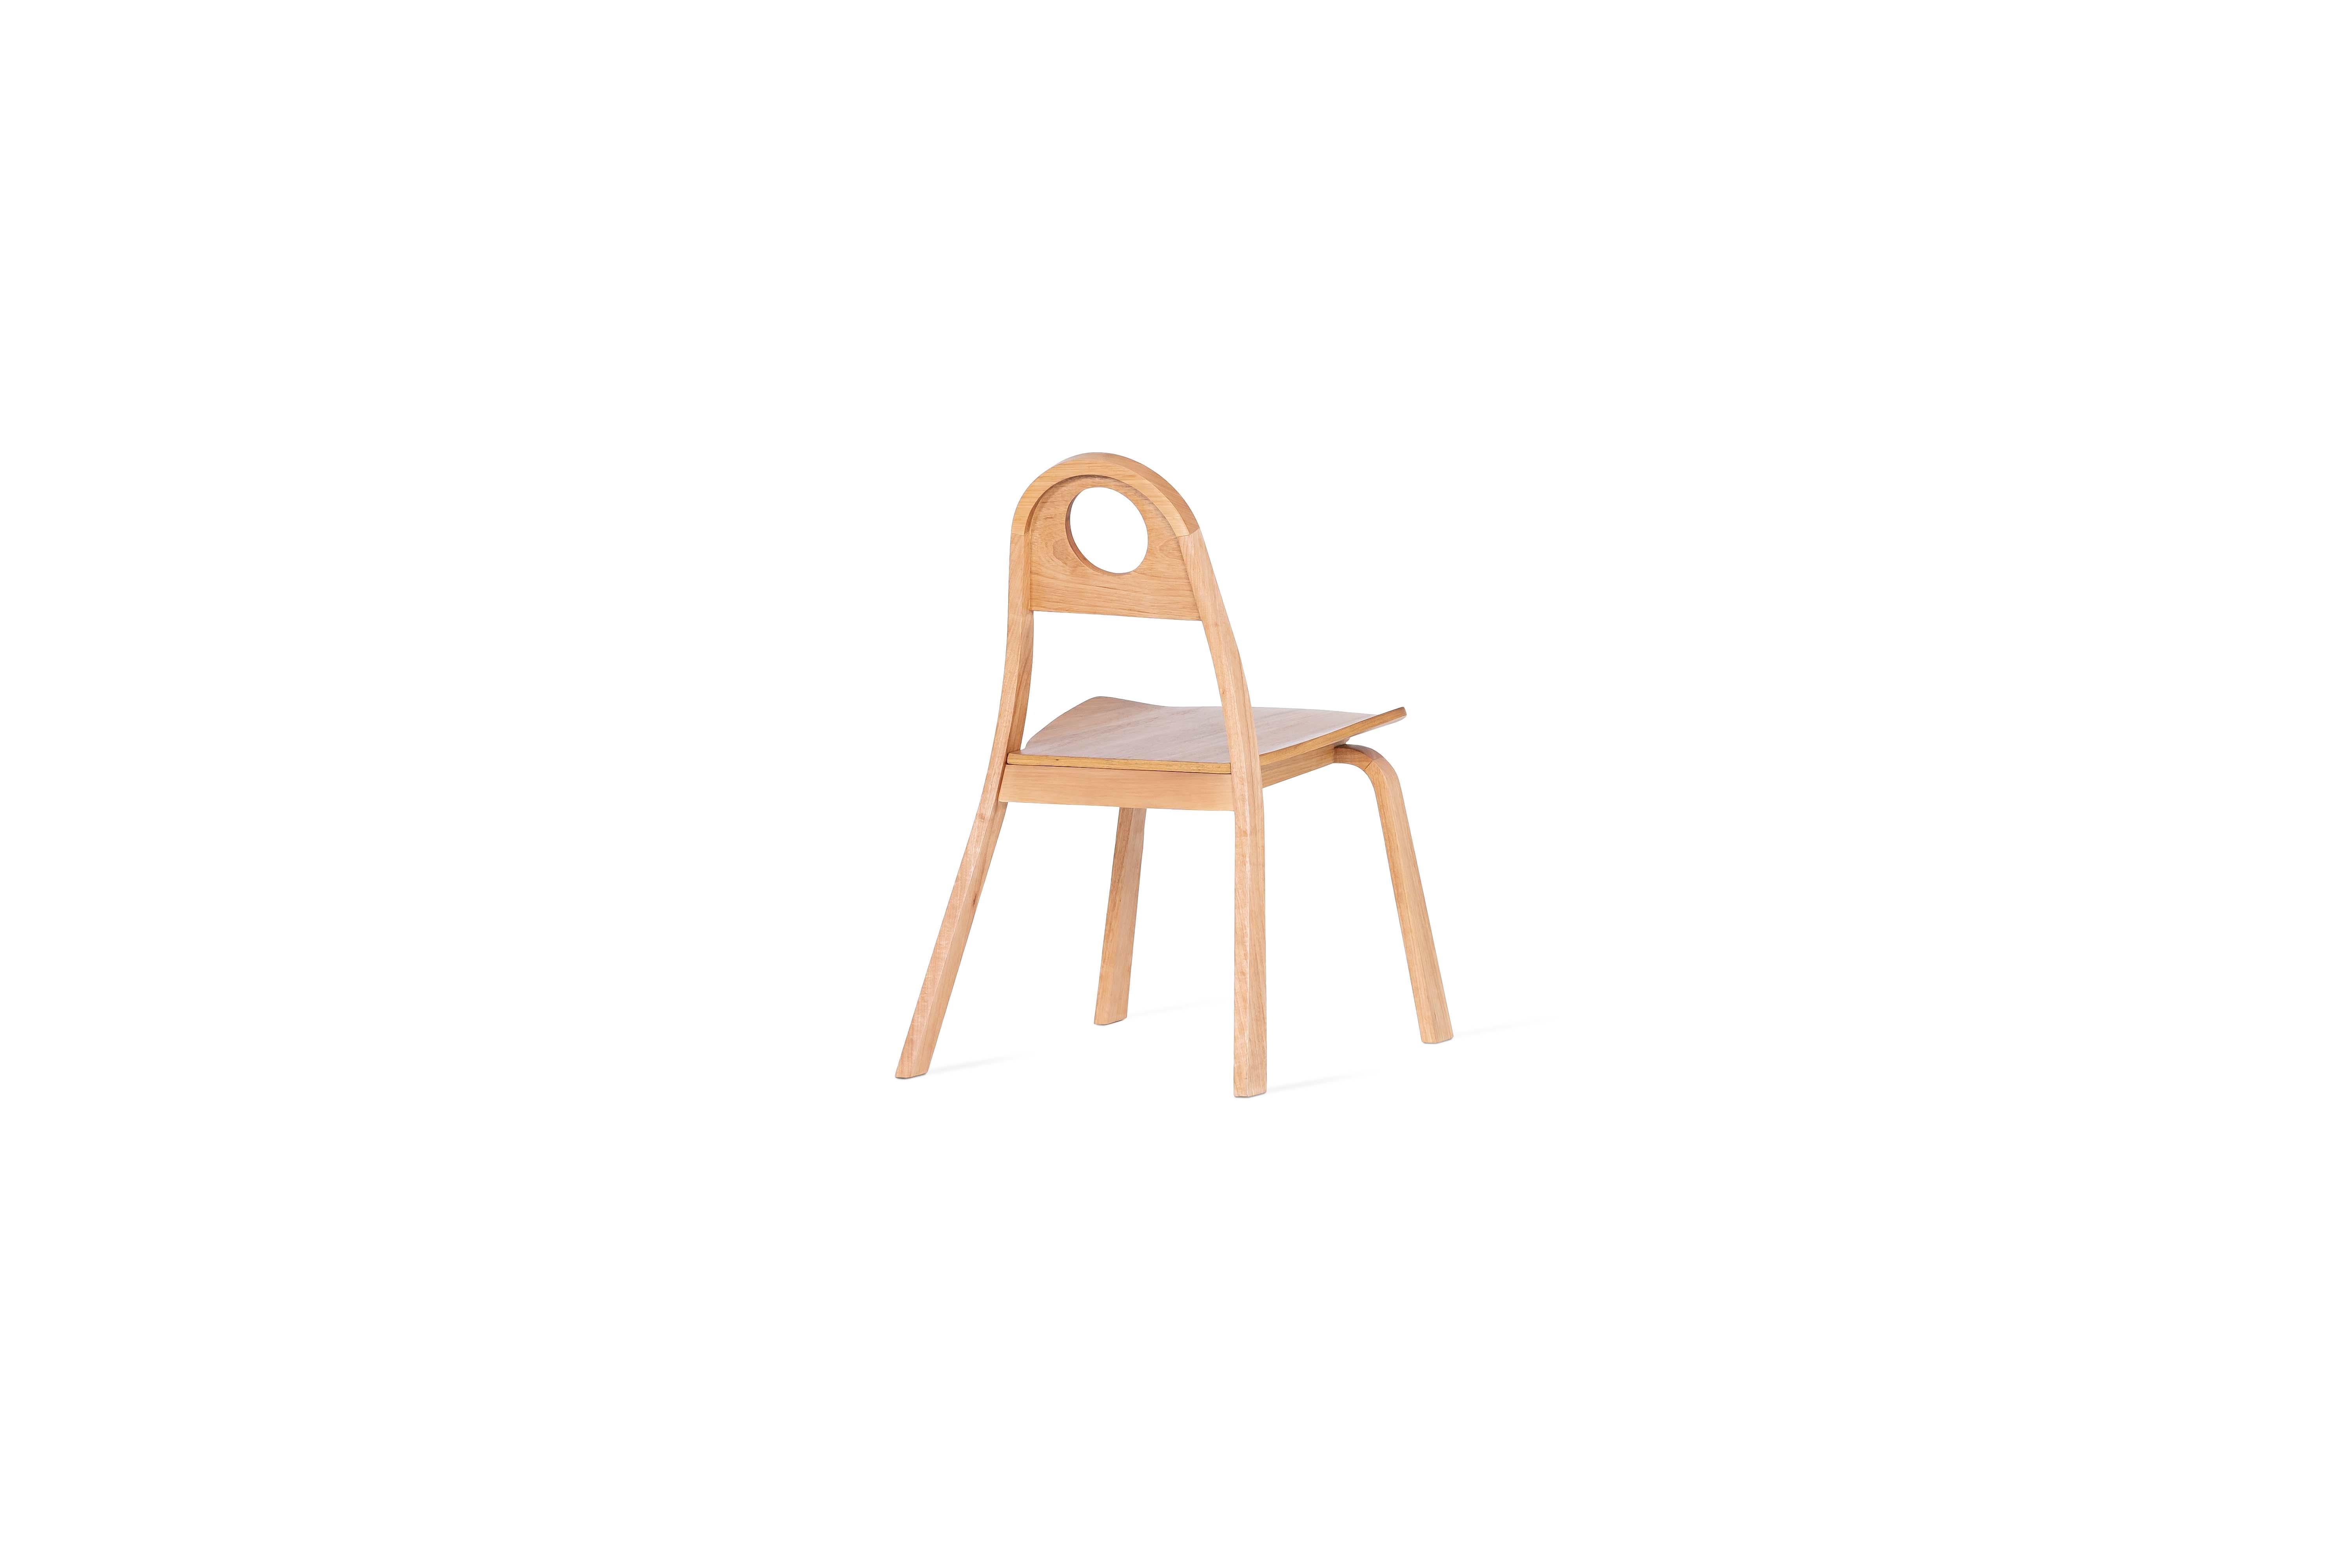 Fuji Chair in Oak finishing by Tiago Curioni In New Condition For Sale In Sao Paulo, SP